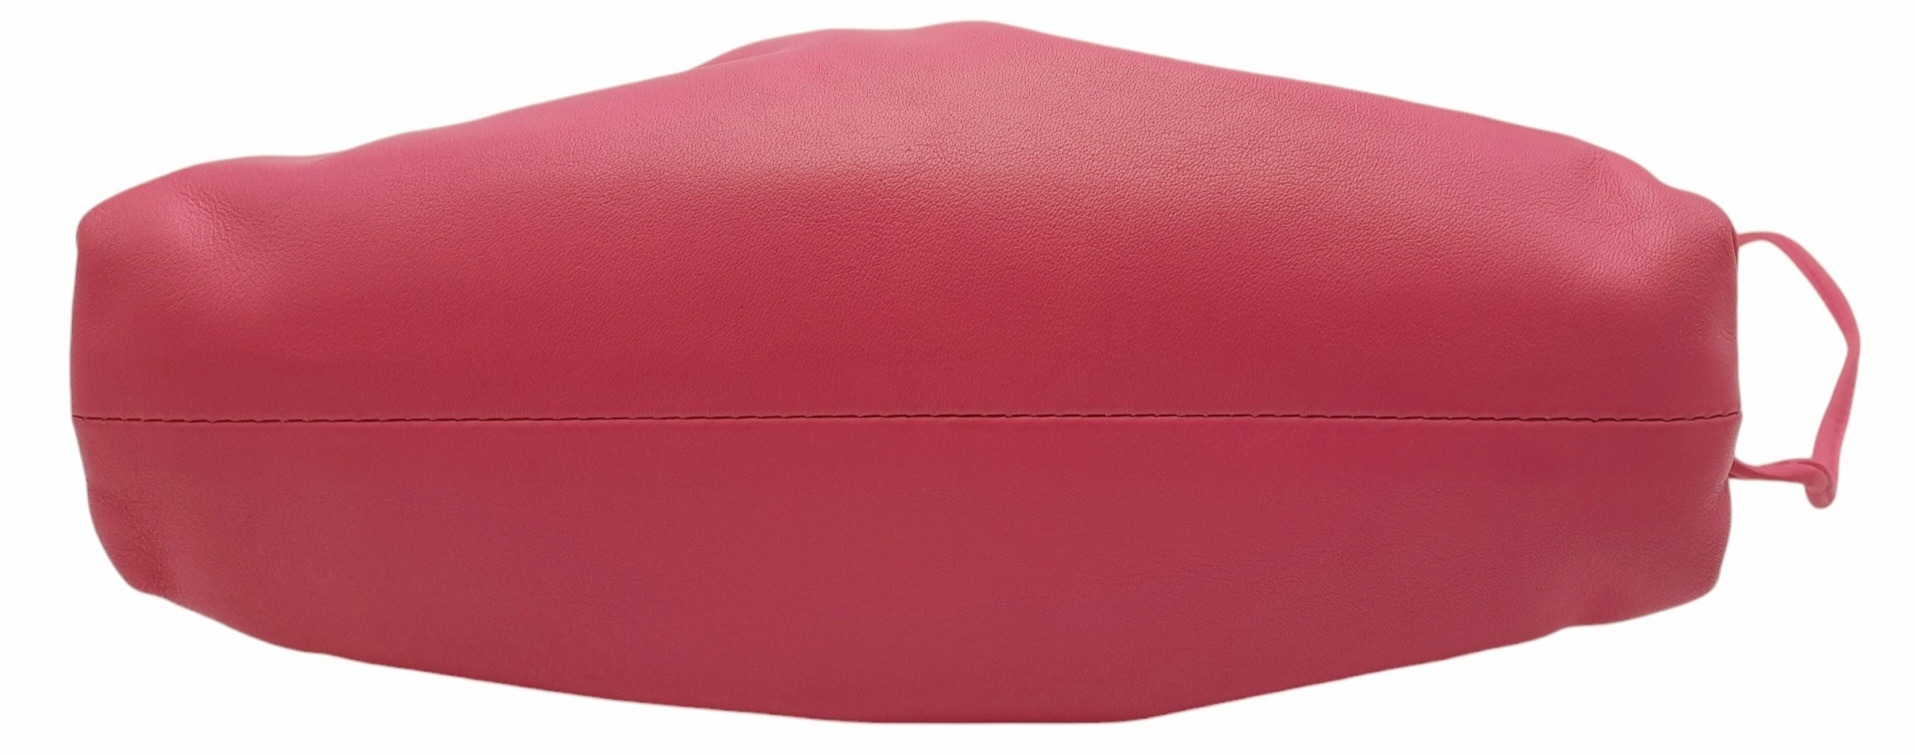 A Bottega Veneta Pink Mini Pouch Bag. Leather exterior with thin strap and magnetic closure. Pink - Image 3 of 9